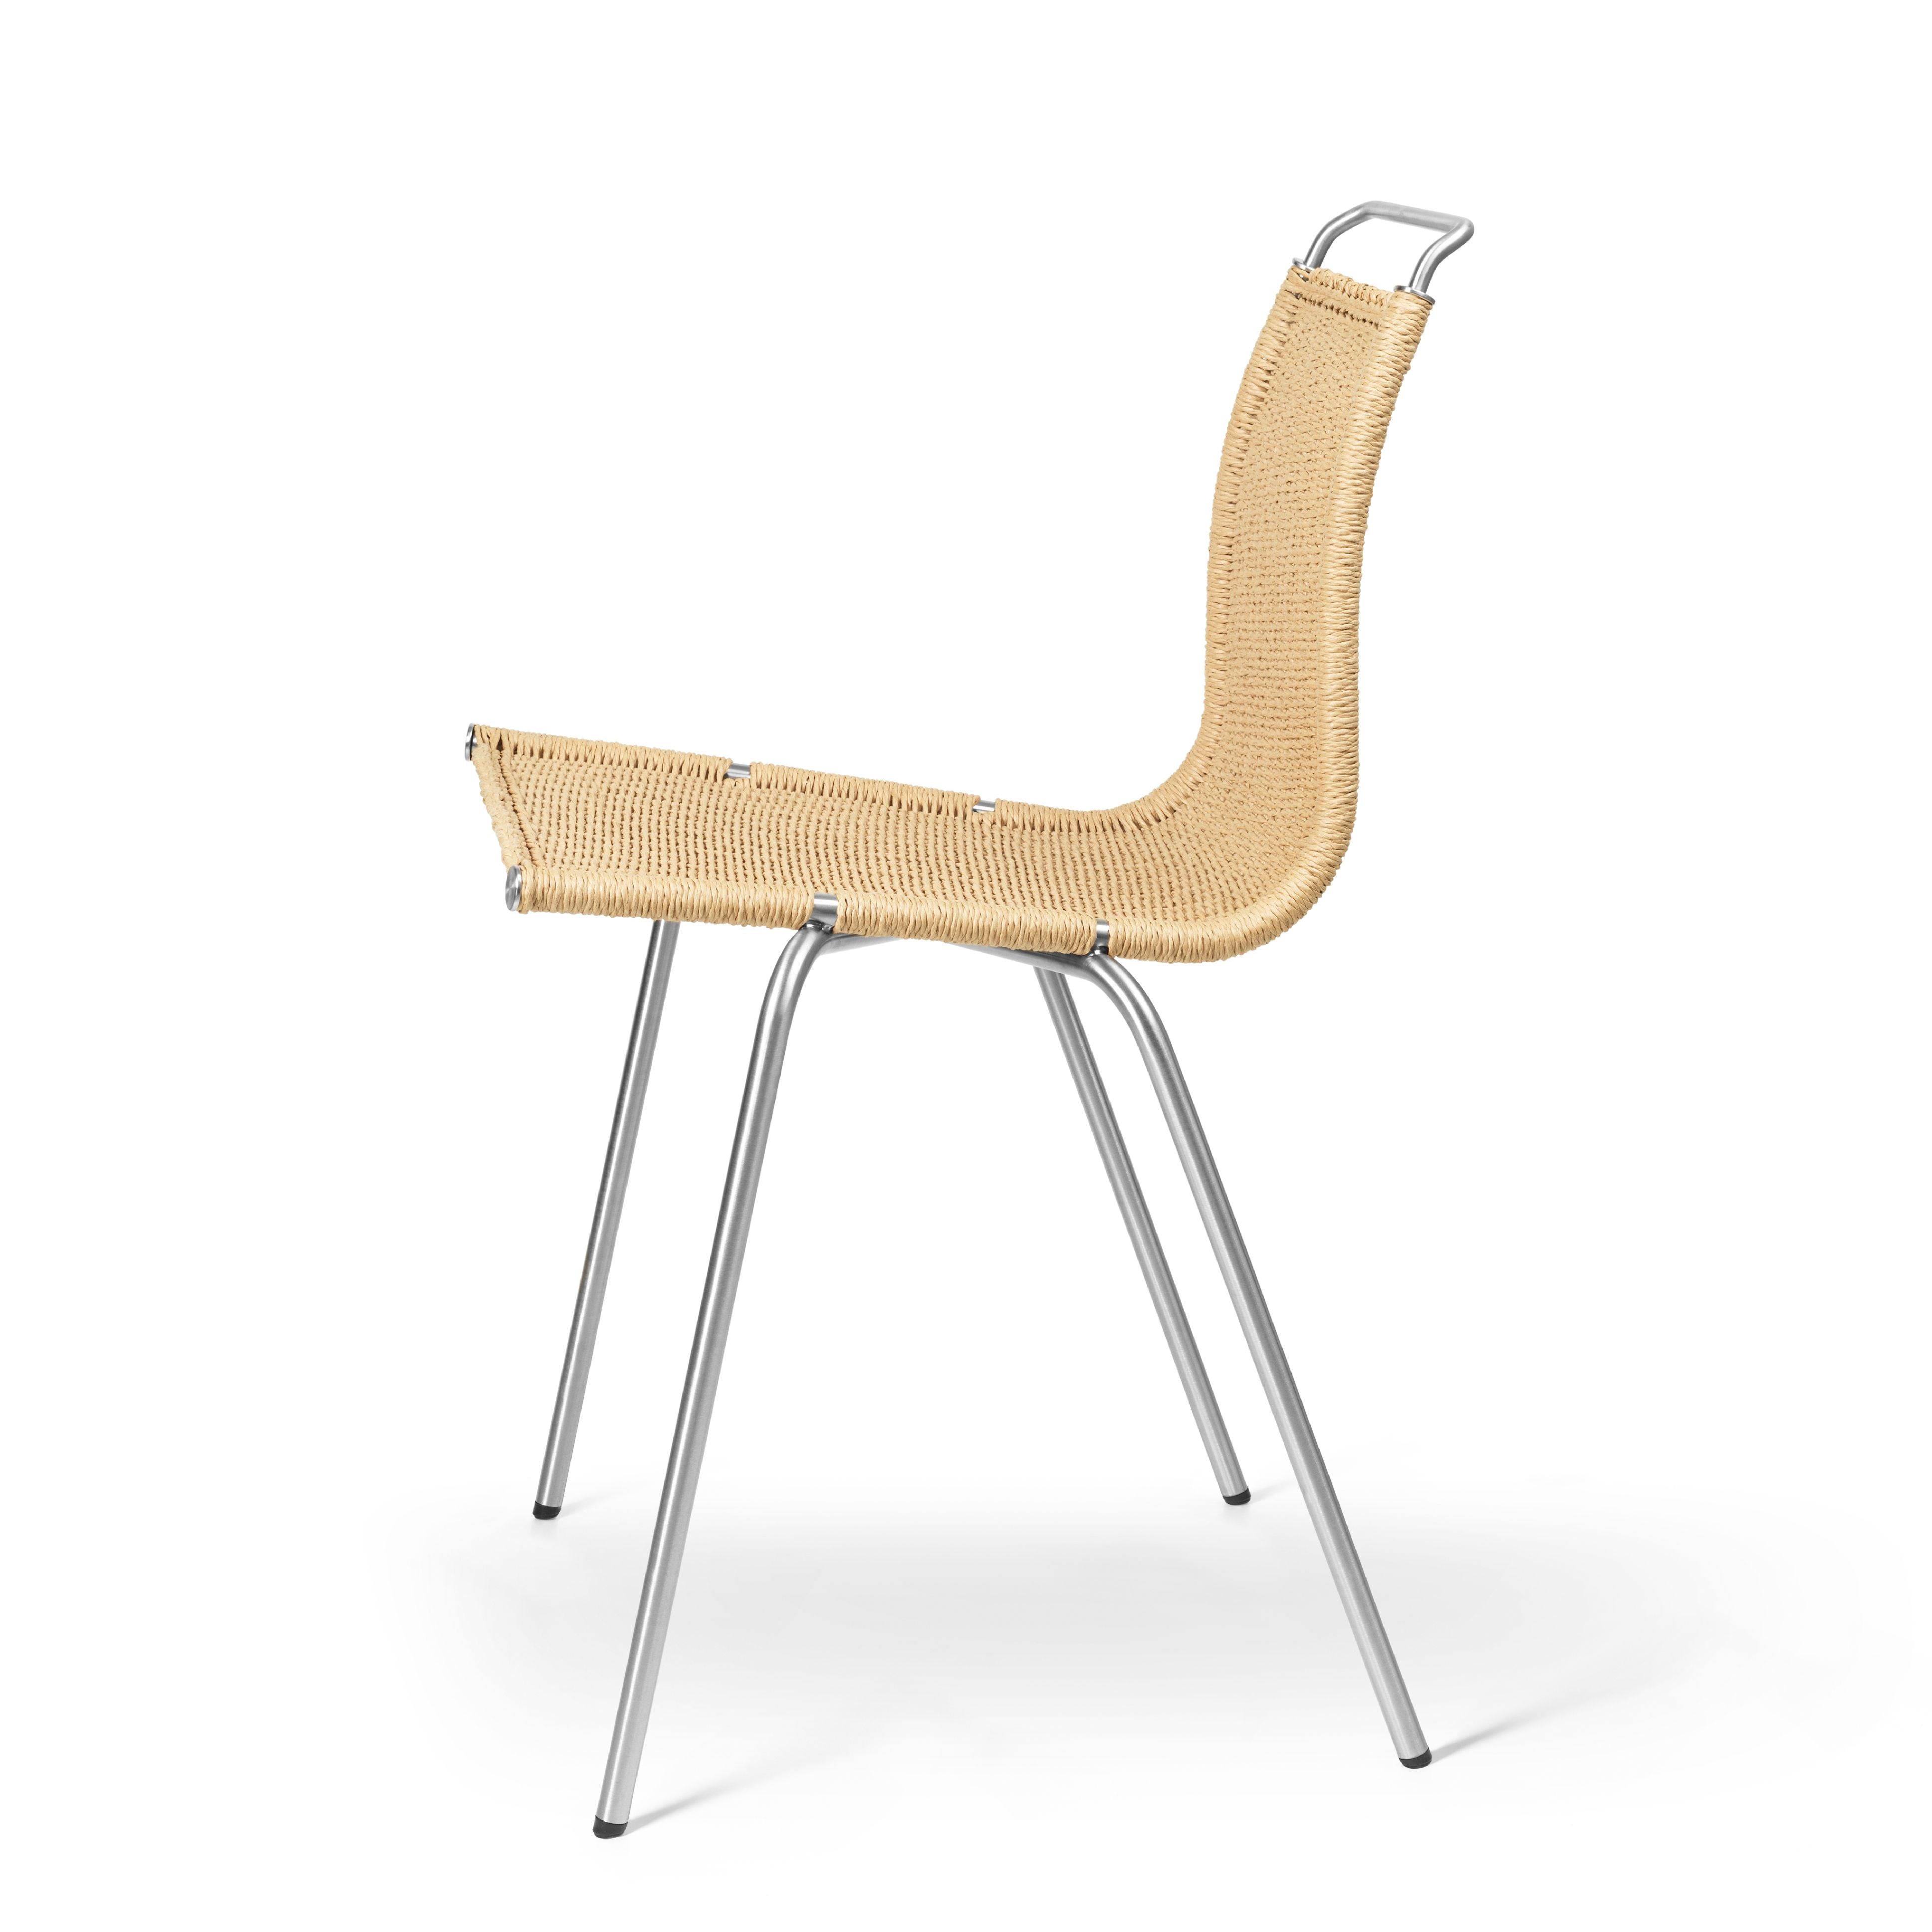 Carl Hansen Pk1 Chair, Stainless Brushed Steel/Natural Paper Cord